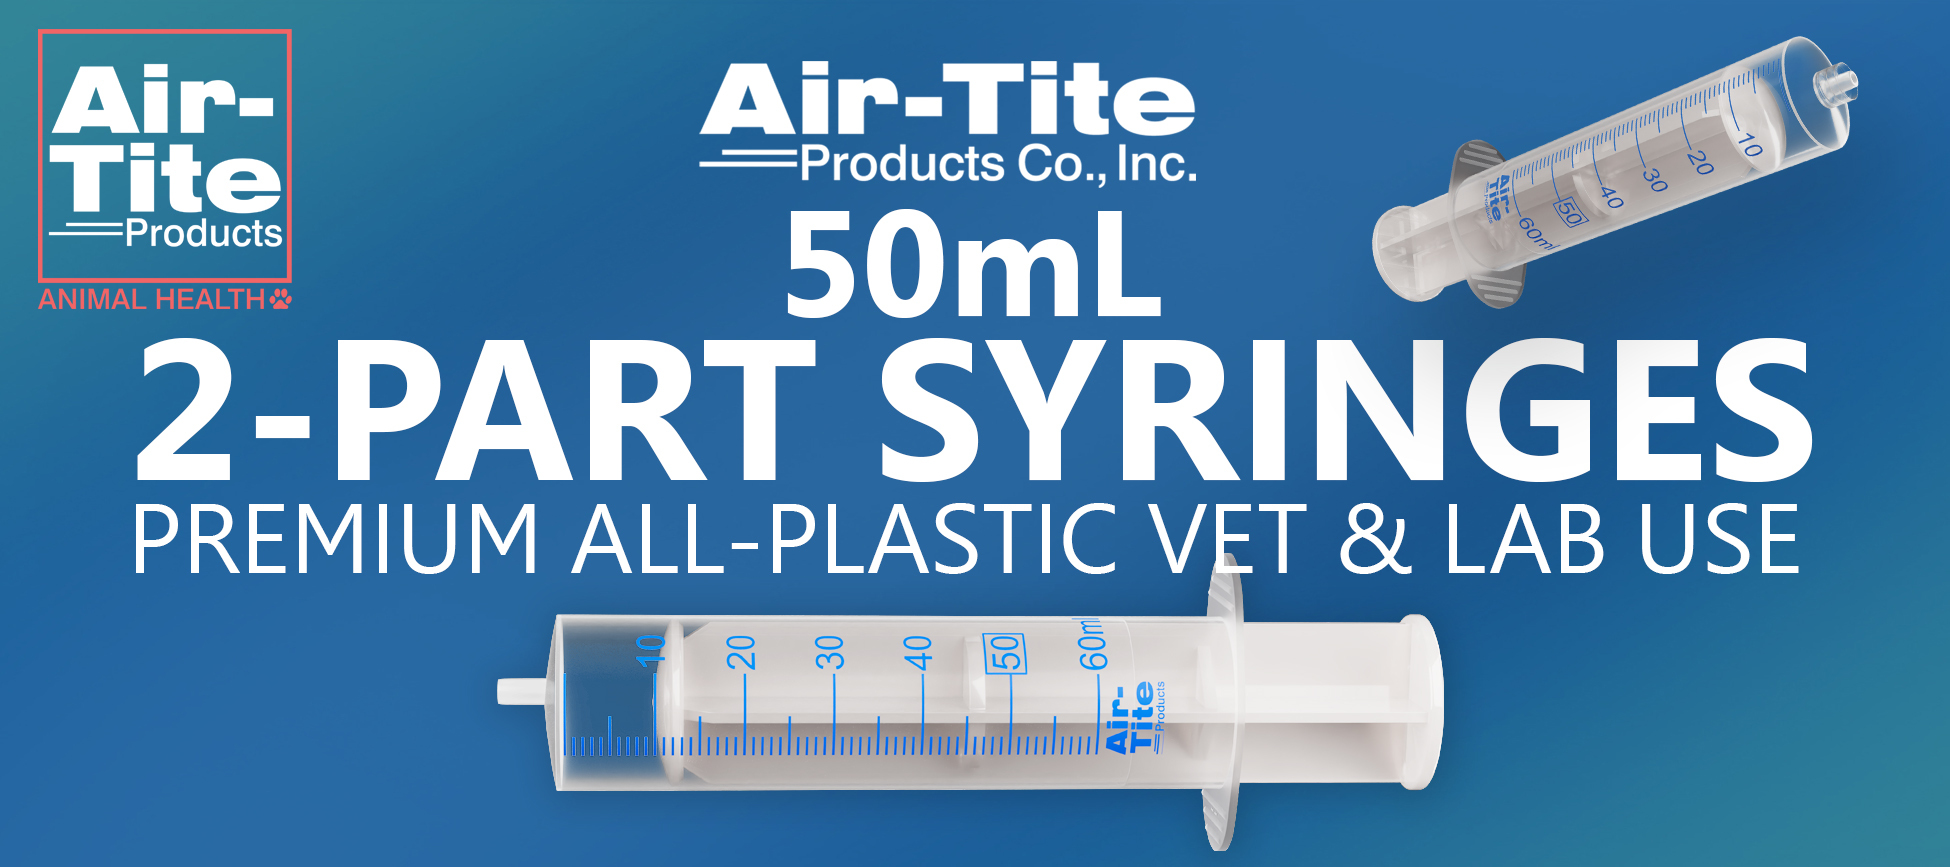 The New 50ml 2-part syringe for veterinary and laboratory use.